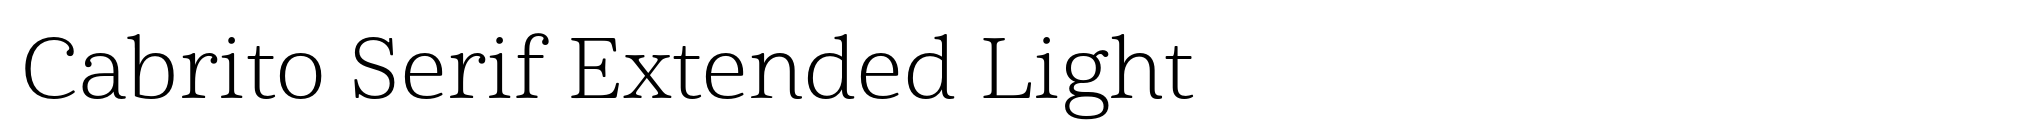 Cabrito Serif Extended Light image